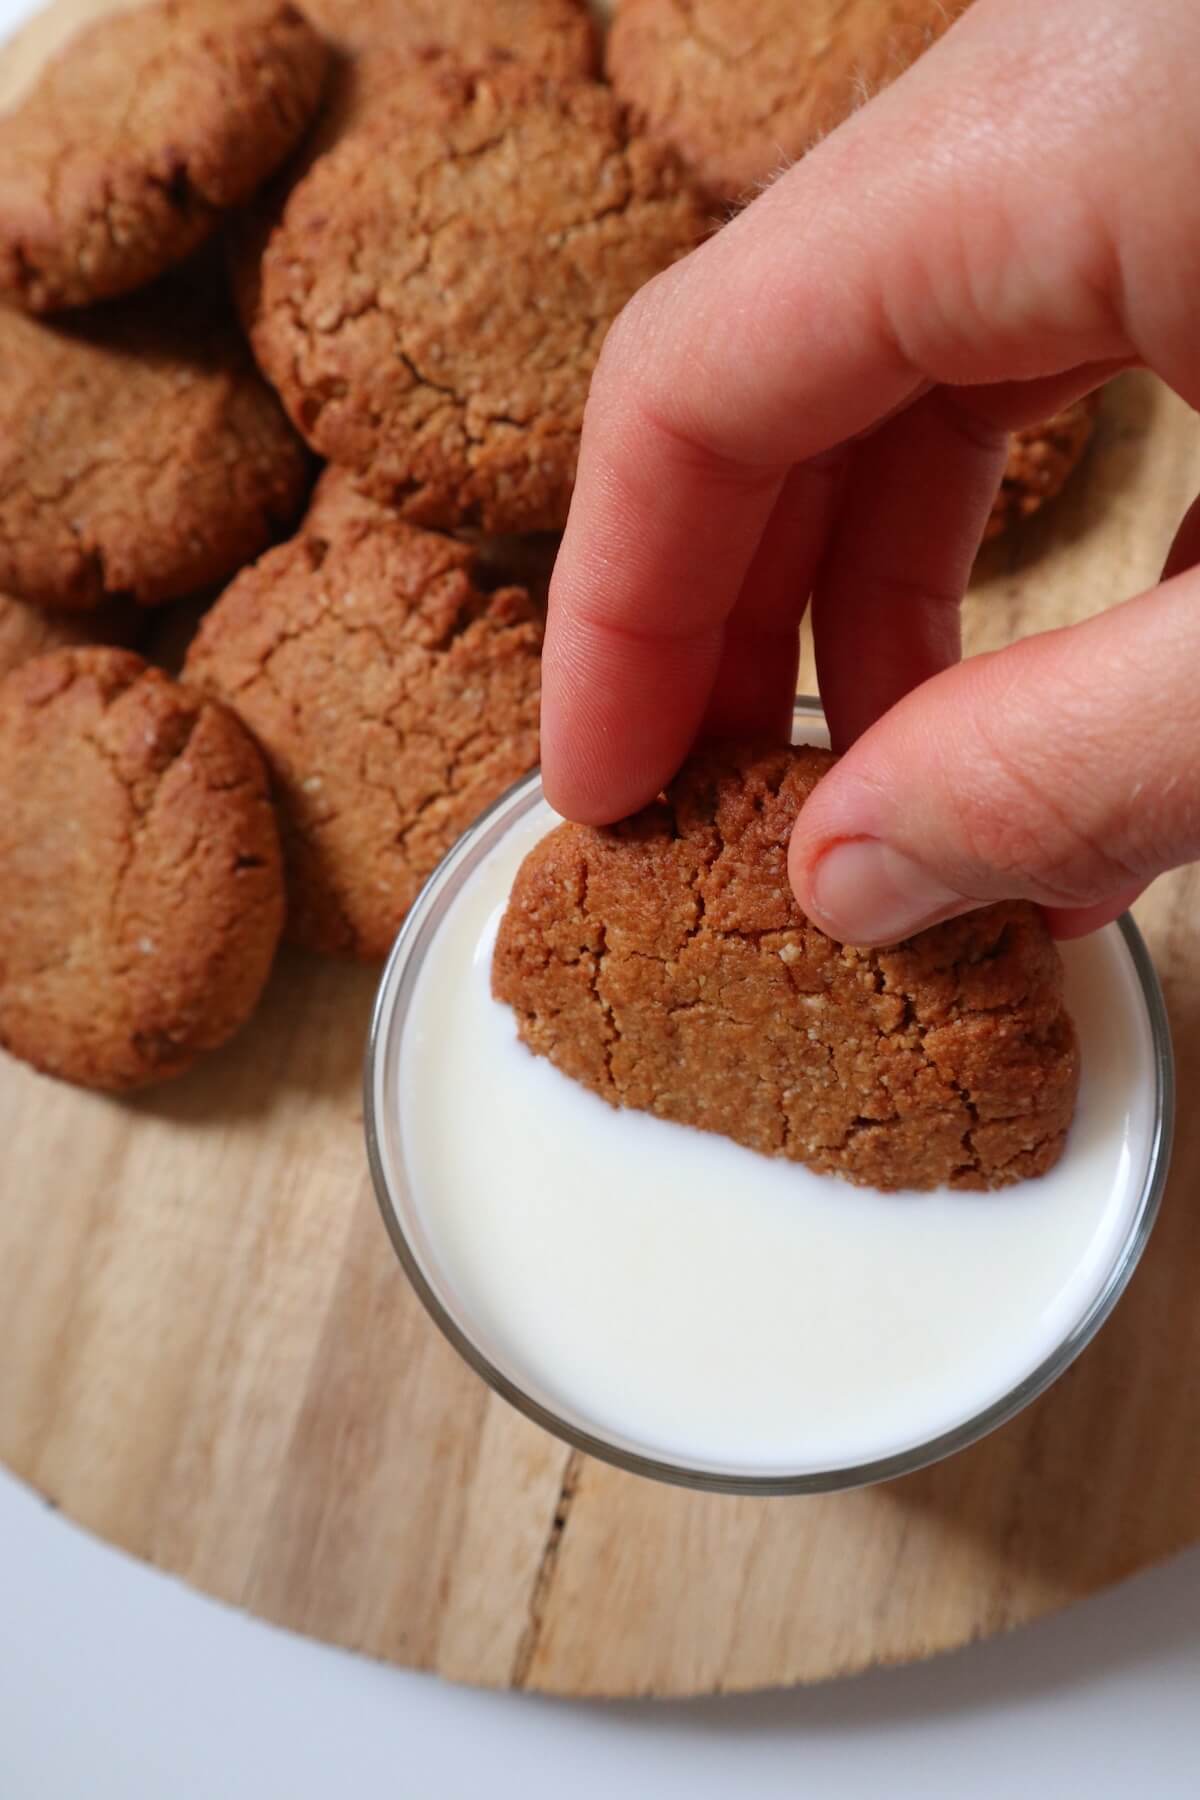 hand dipping cookie in milk